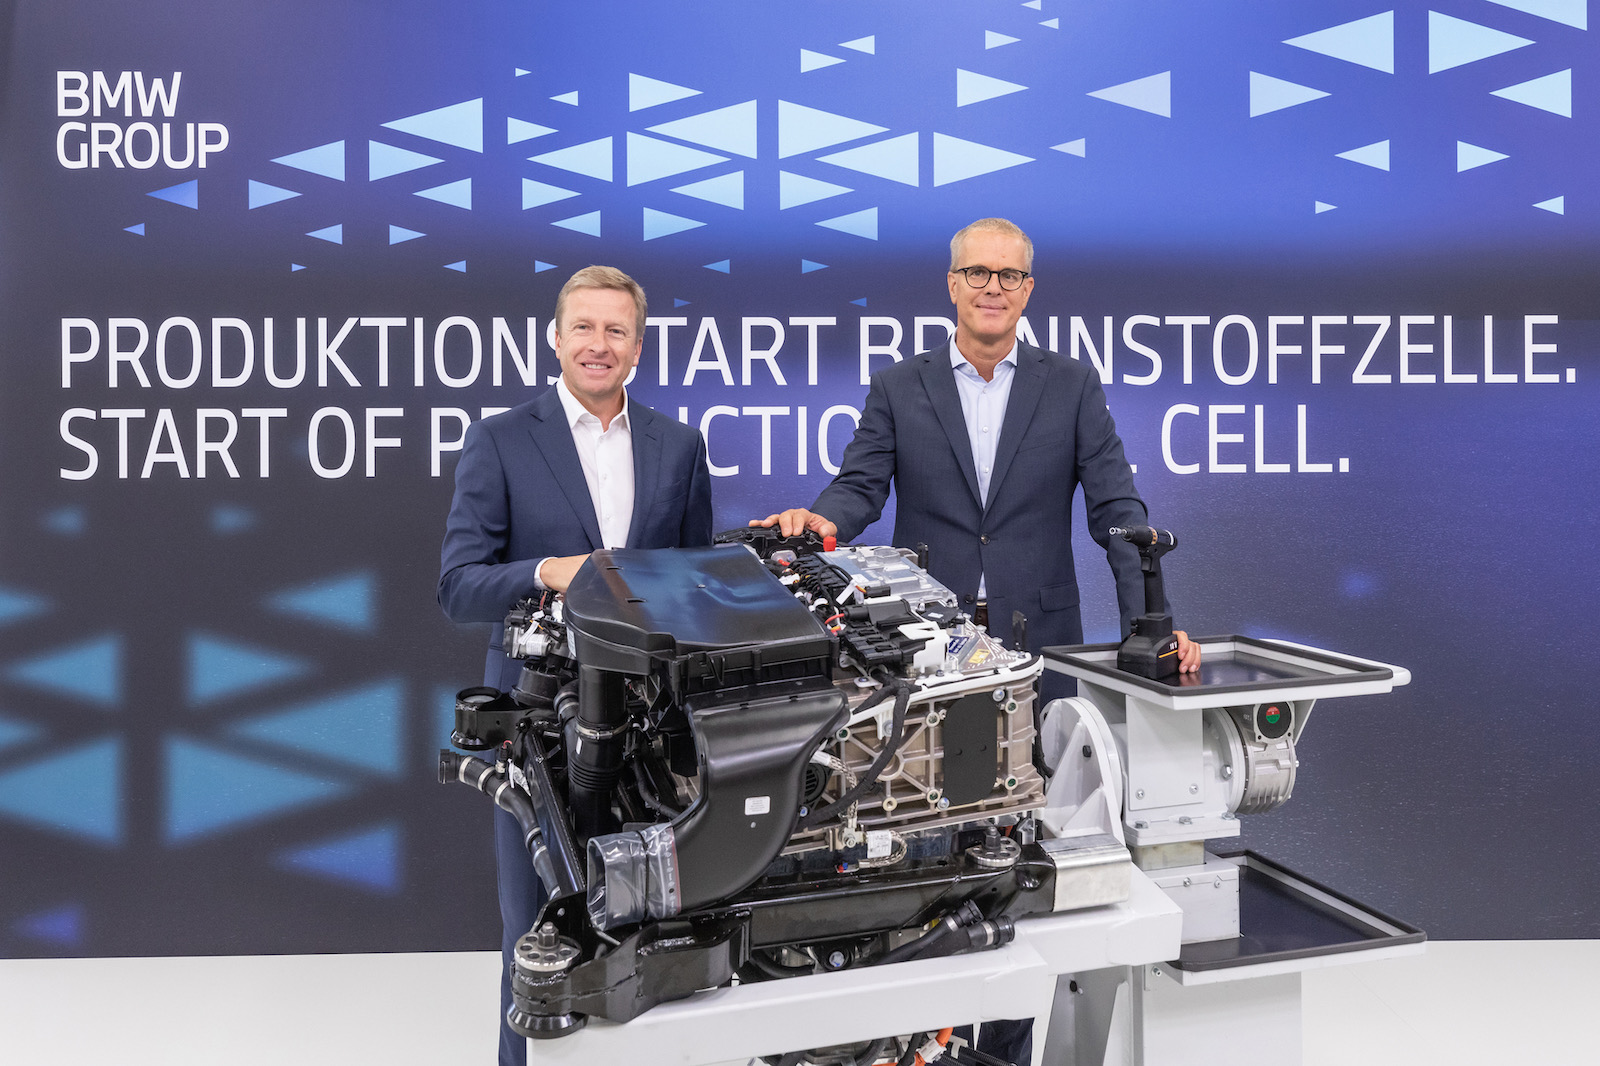 BMW kicks off hydrogen fuel cell production for iX5 SUV